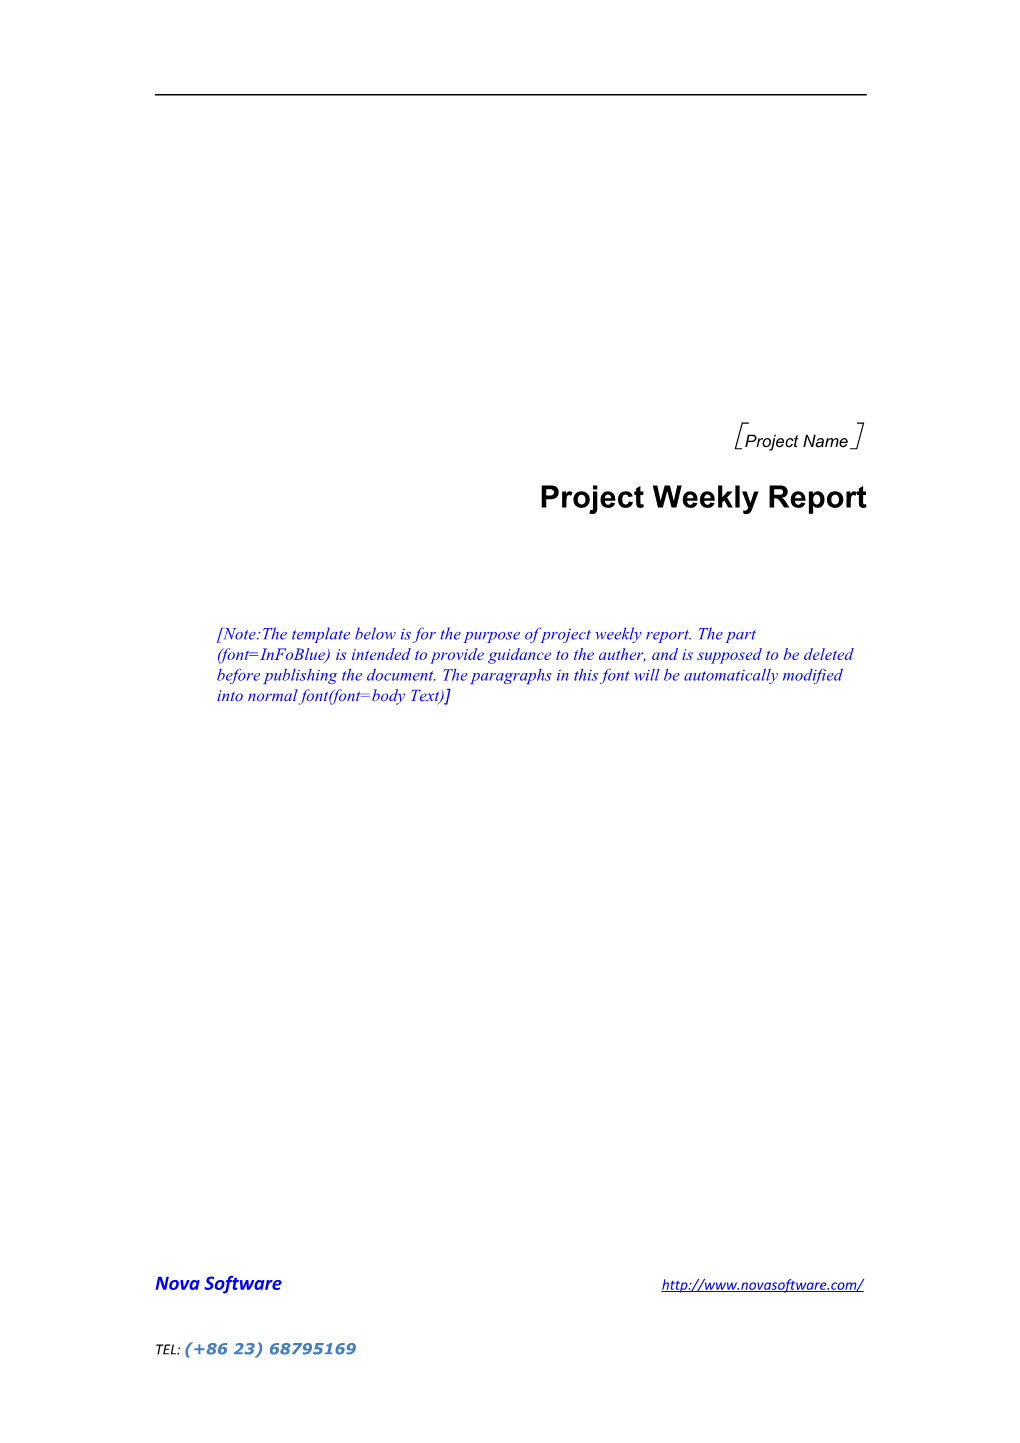 Project Weekly Report